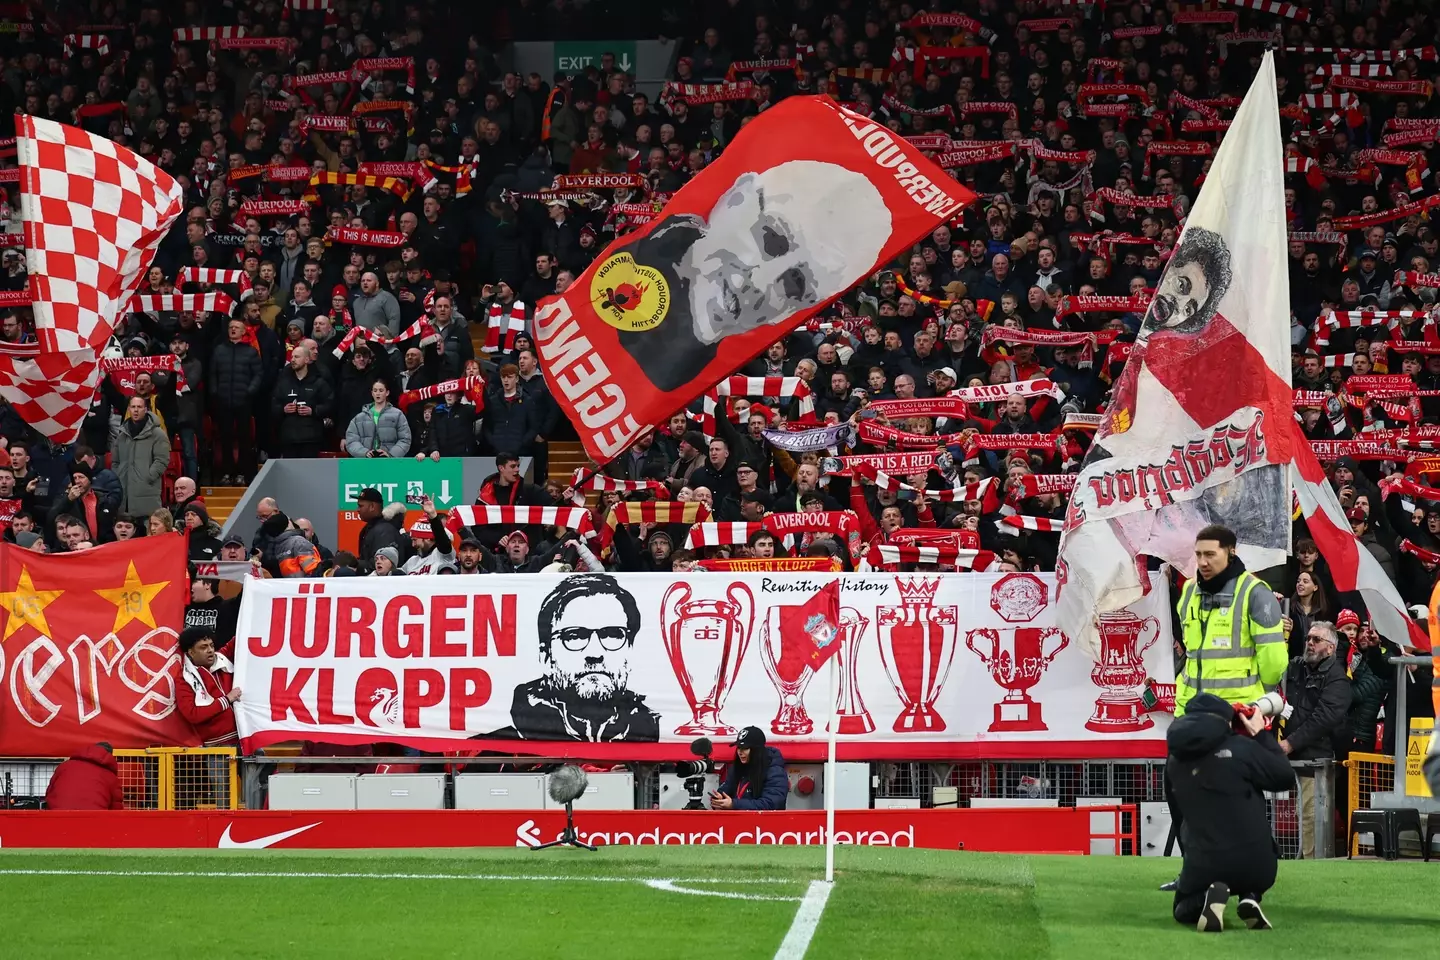 Klopp received a rousing reception ahead of kick-off (Getty)